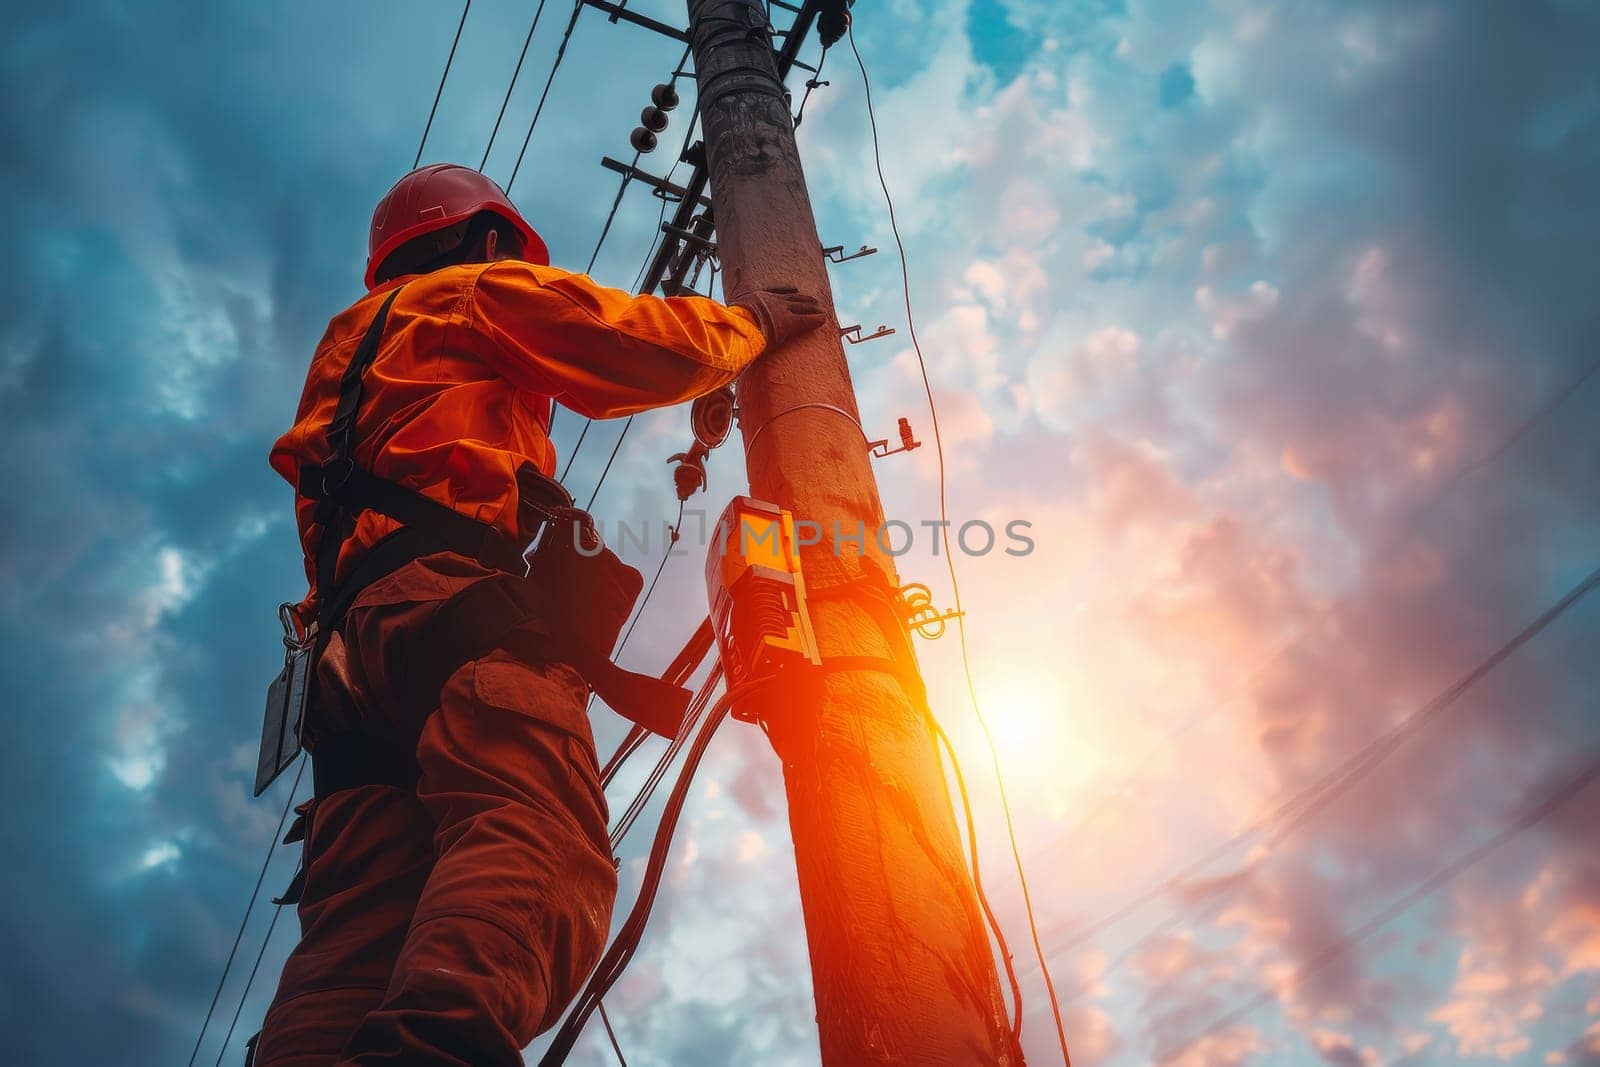 A man in an orange safety vest is working on a power line by itchaznong